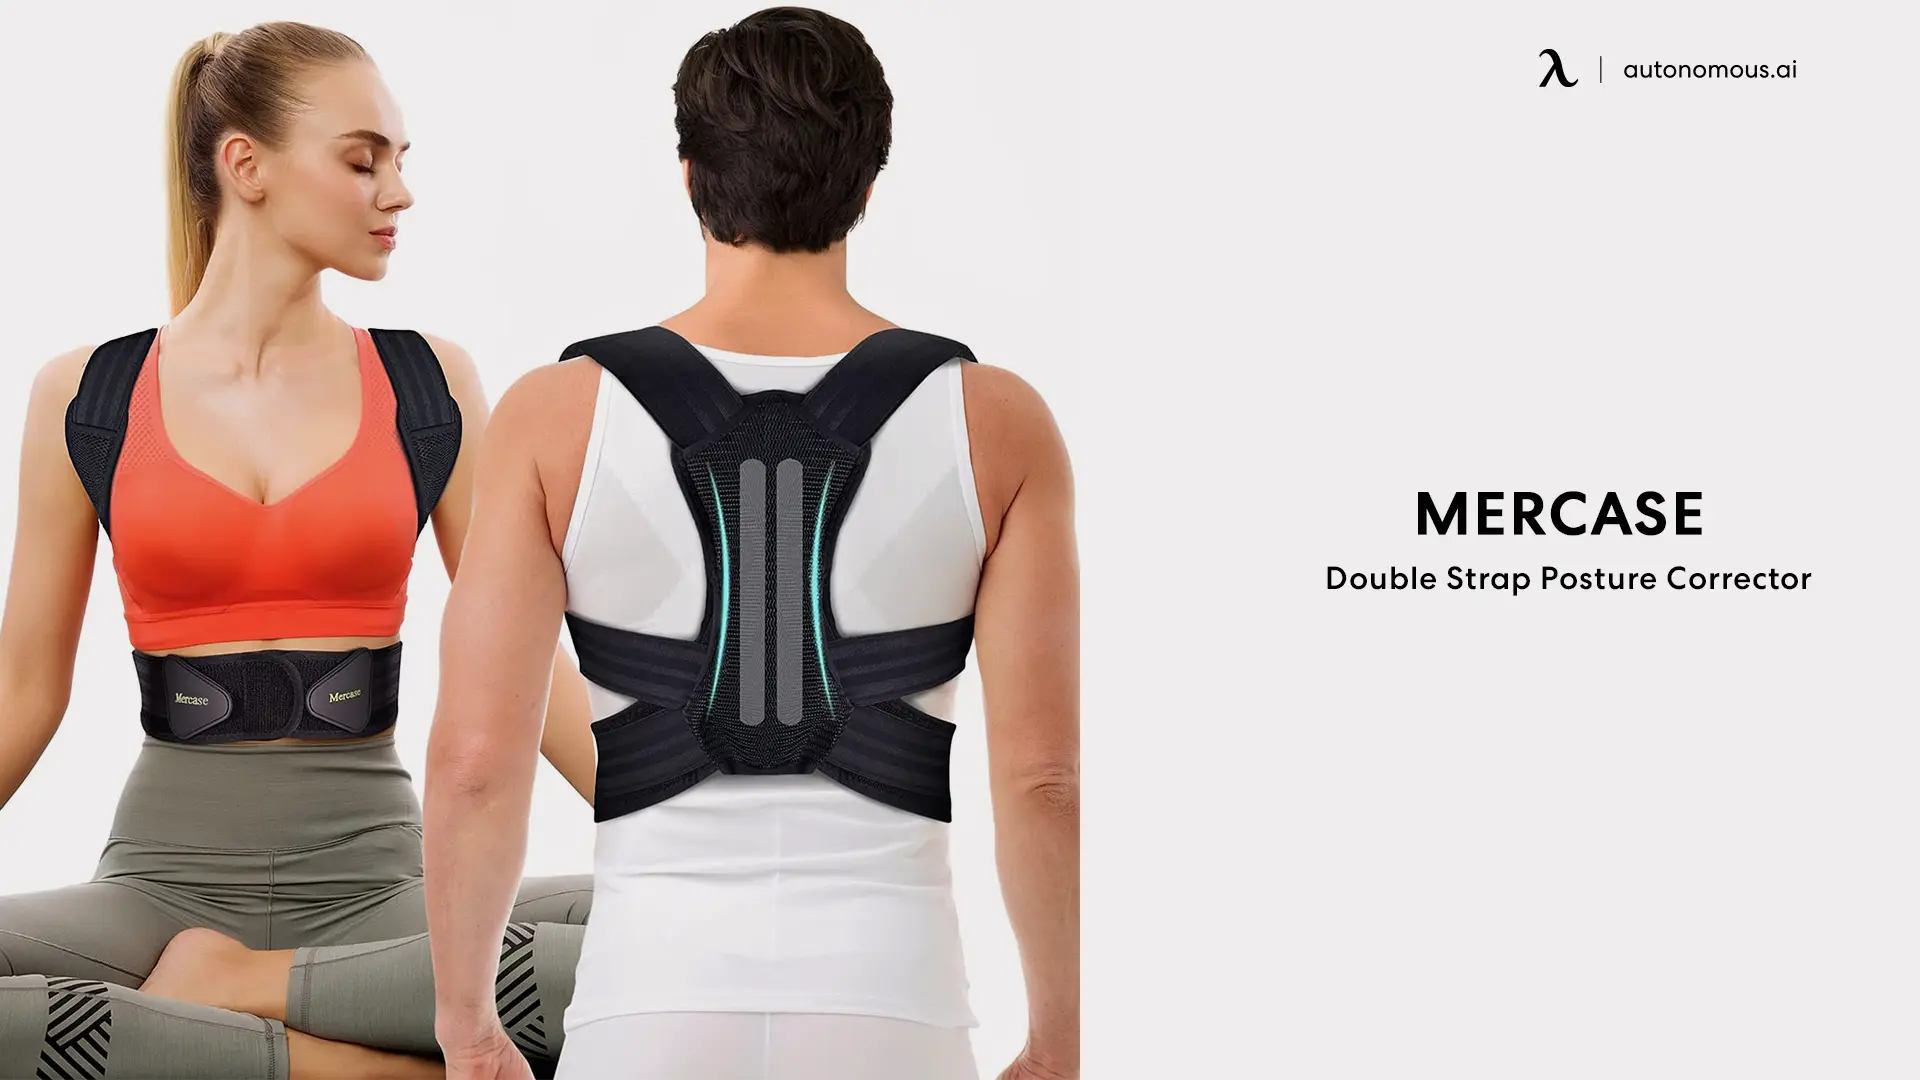 Double Strap Posture Corrector by Mercase